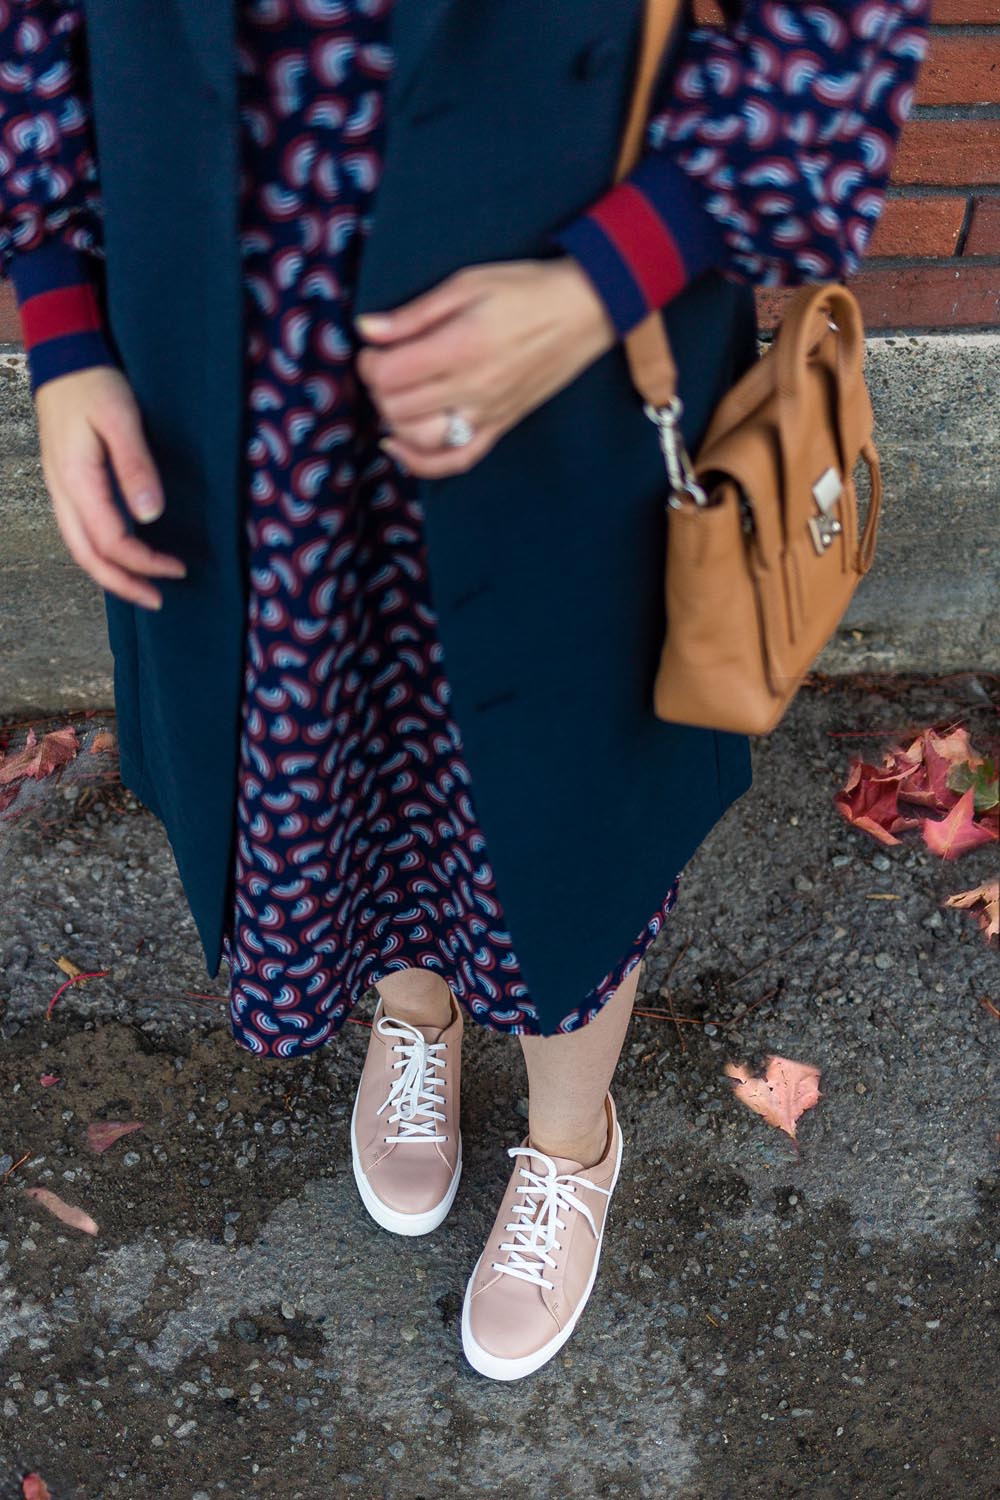 Sneakers Outfit Ideas to Wear this Fall // Seattle Style Blog